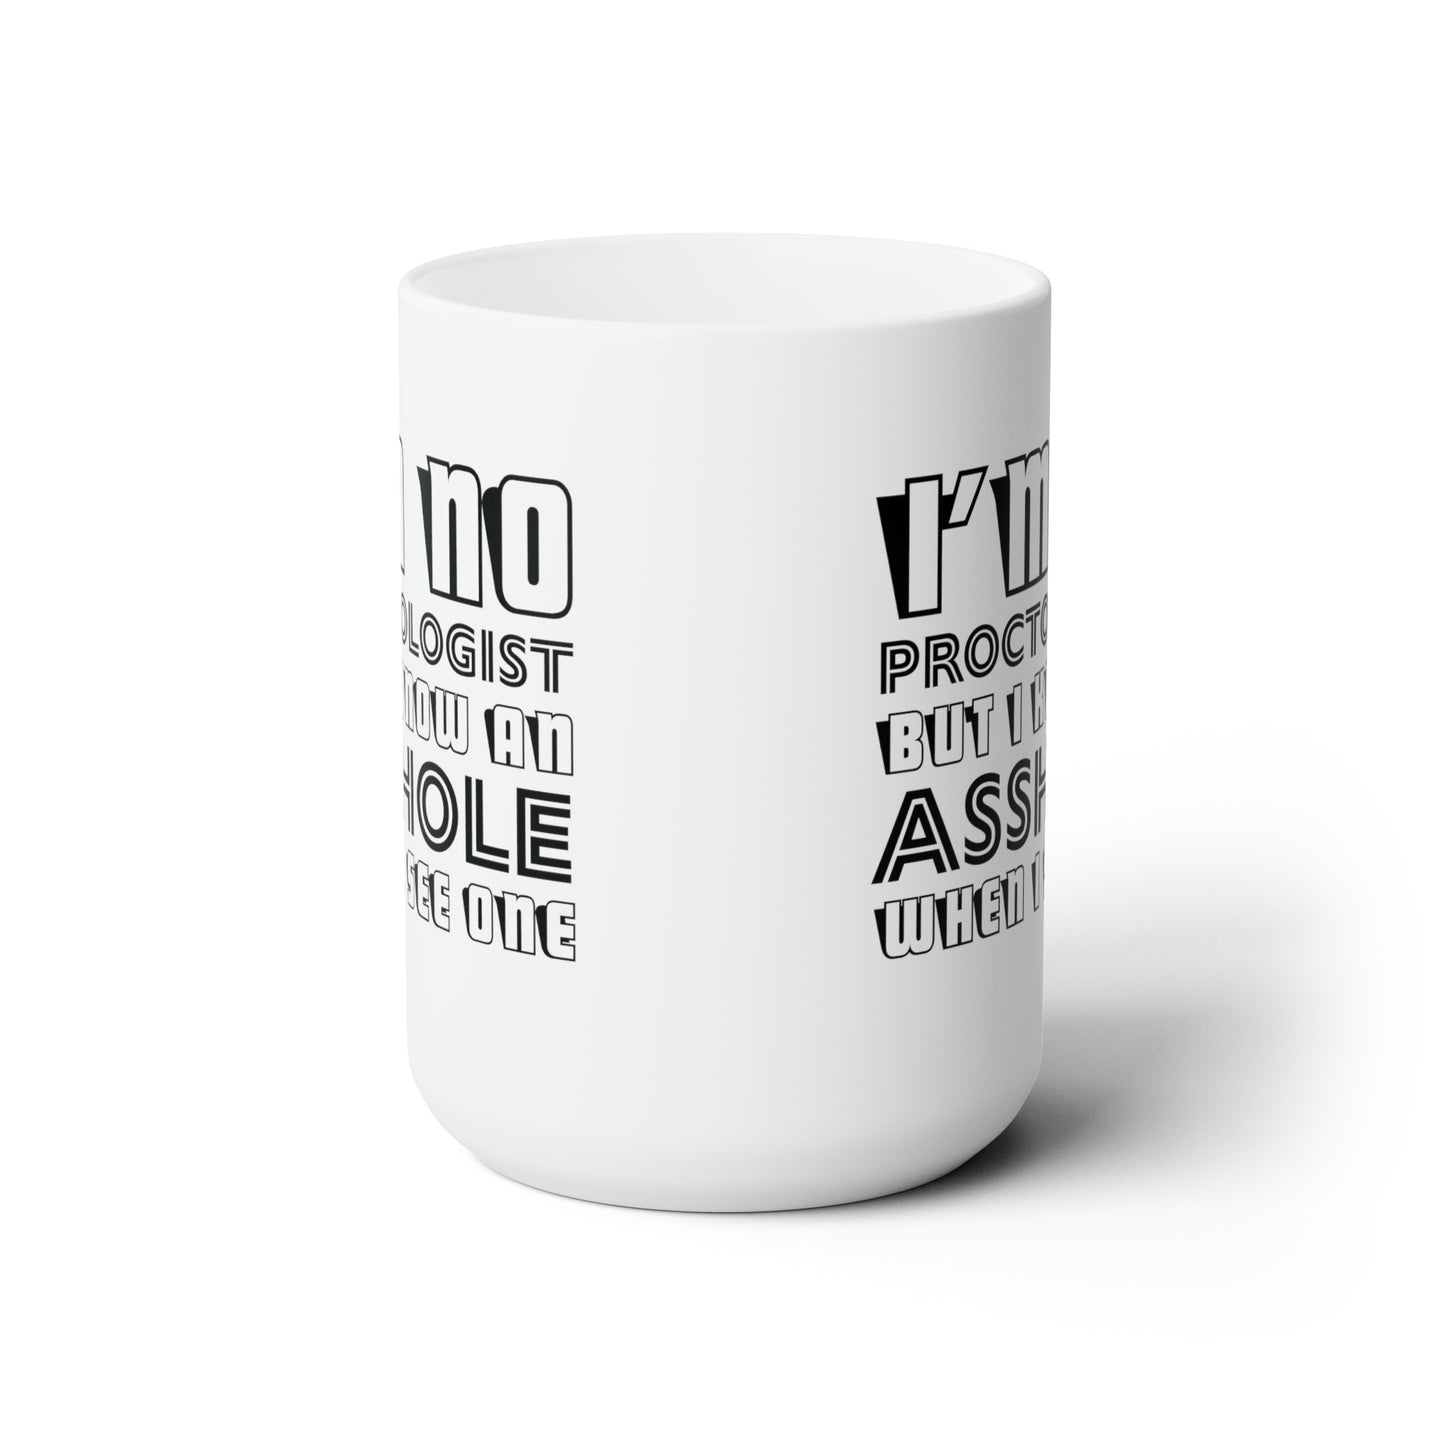 Proctologist Coffee Mug For Sarcastic Humor Hot Tea Cup For Funny Gift